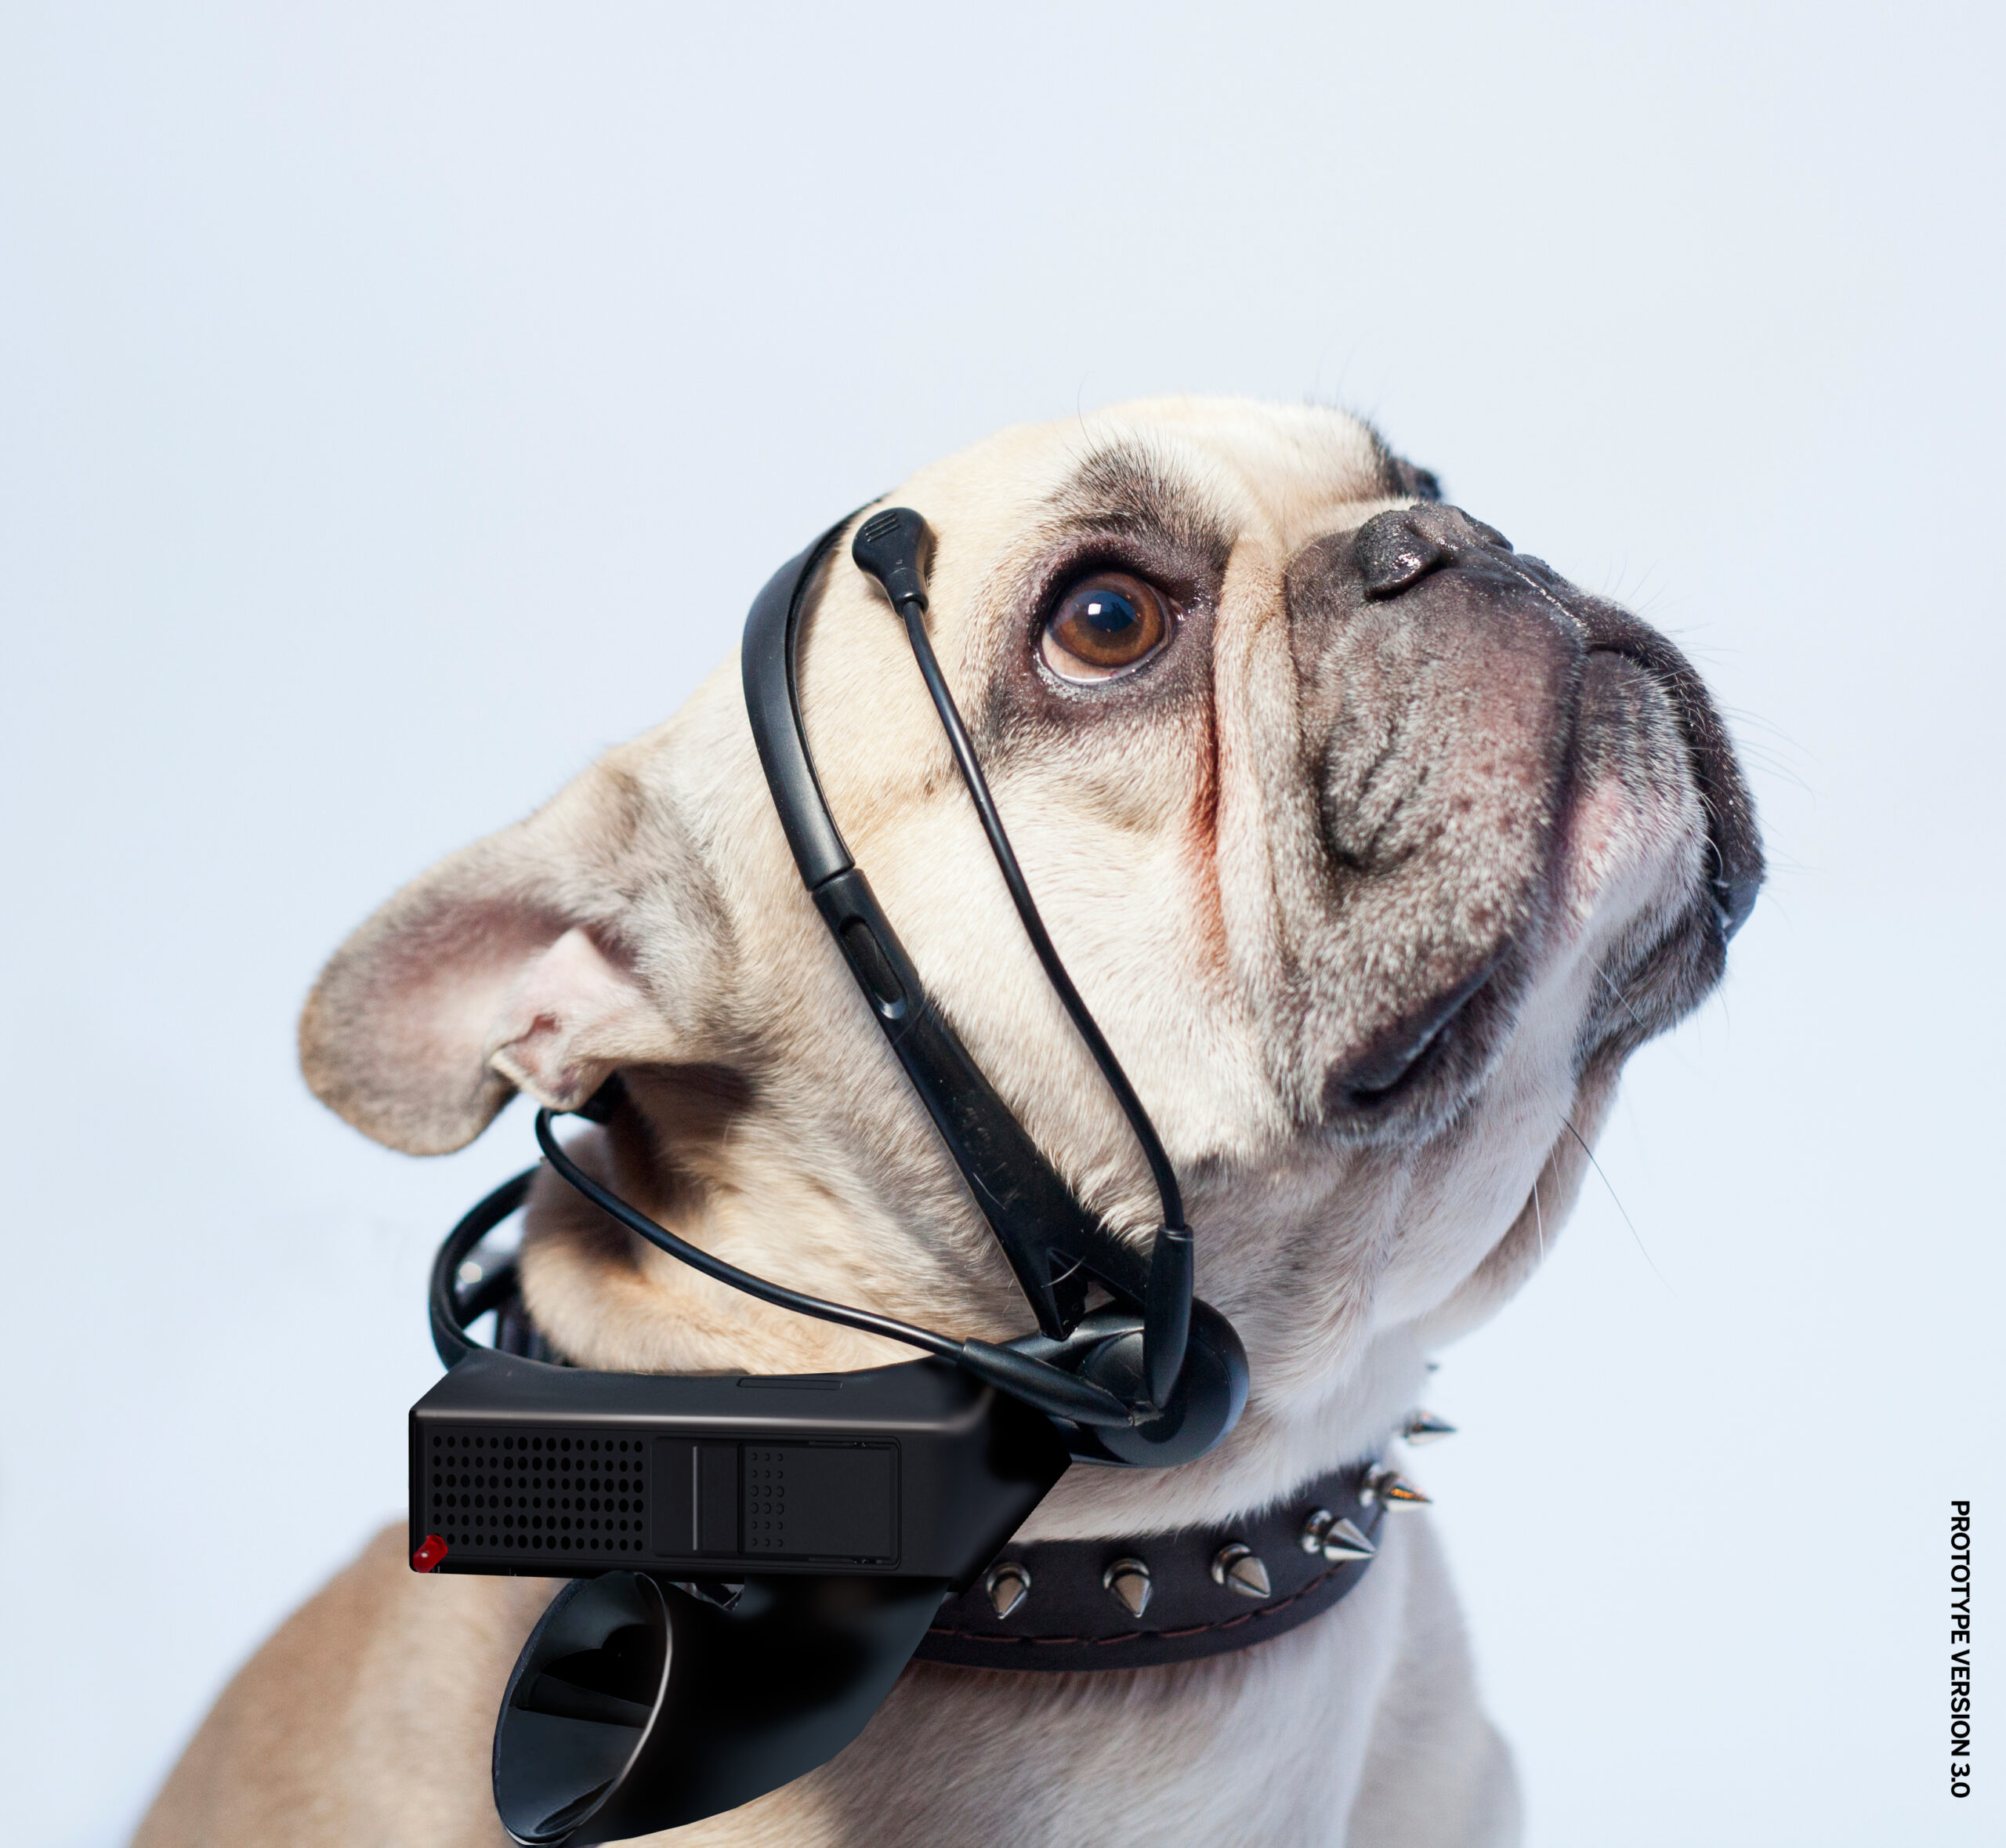 This Dog Thought-To-Speech Translator Is Bogus